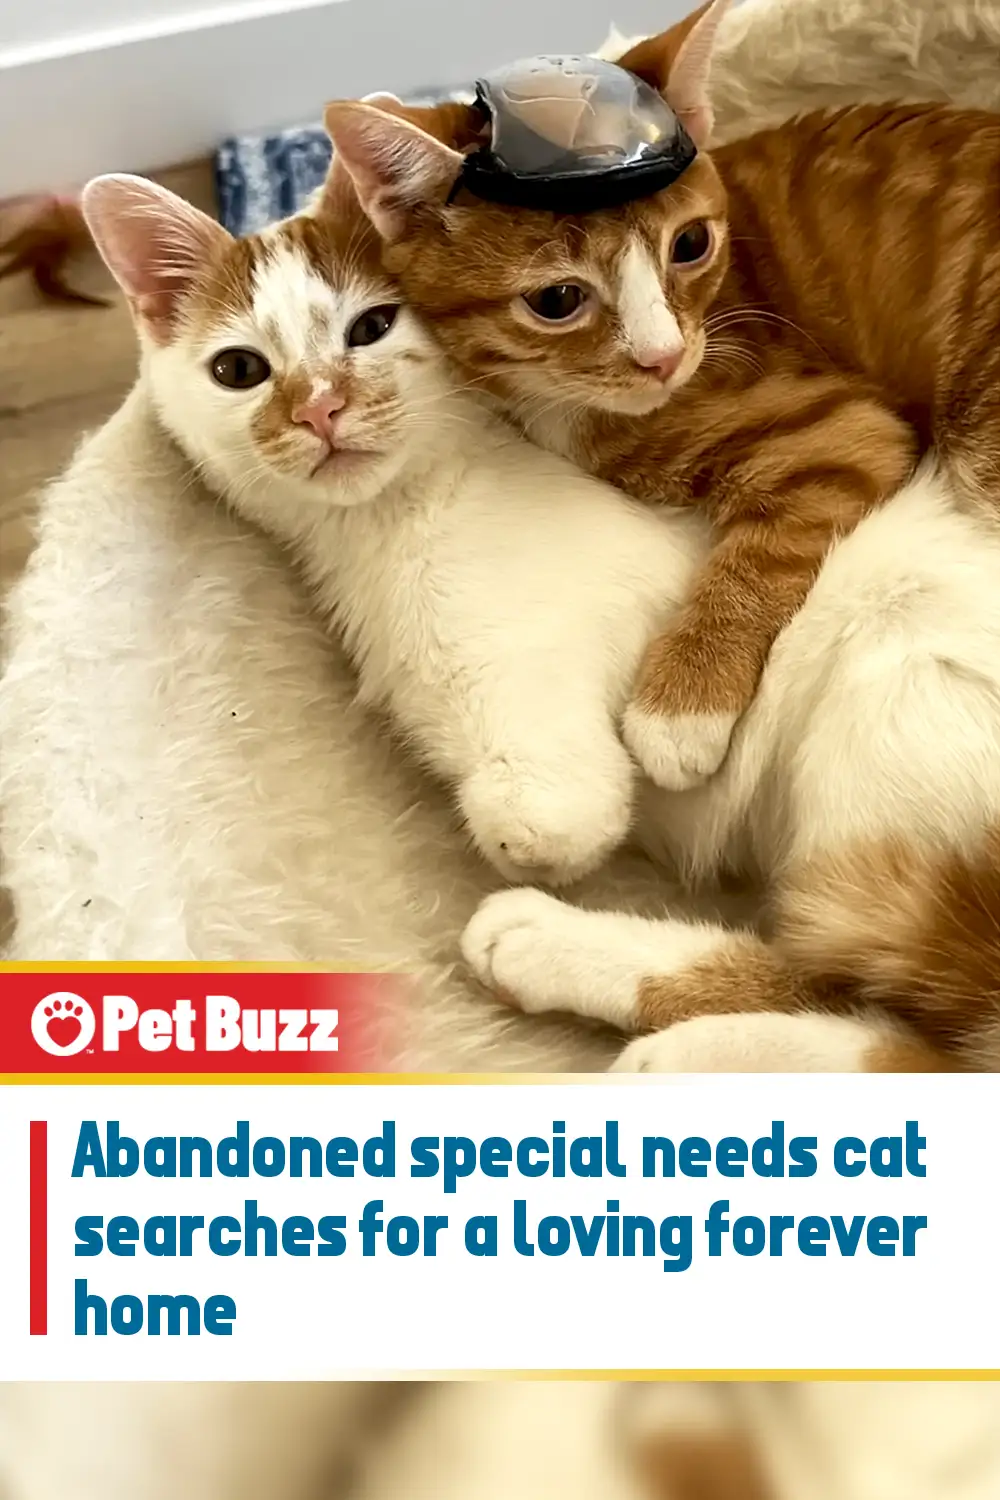 Abandoned special needs cat searches for a loving forever home